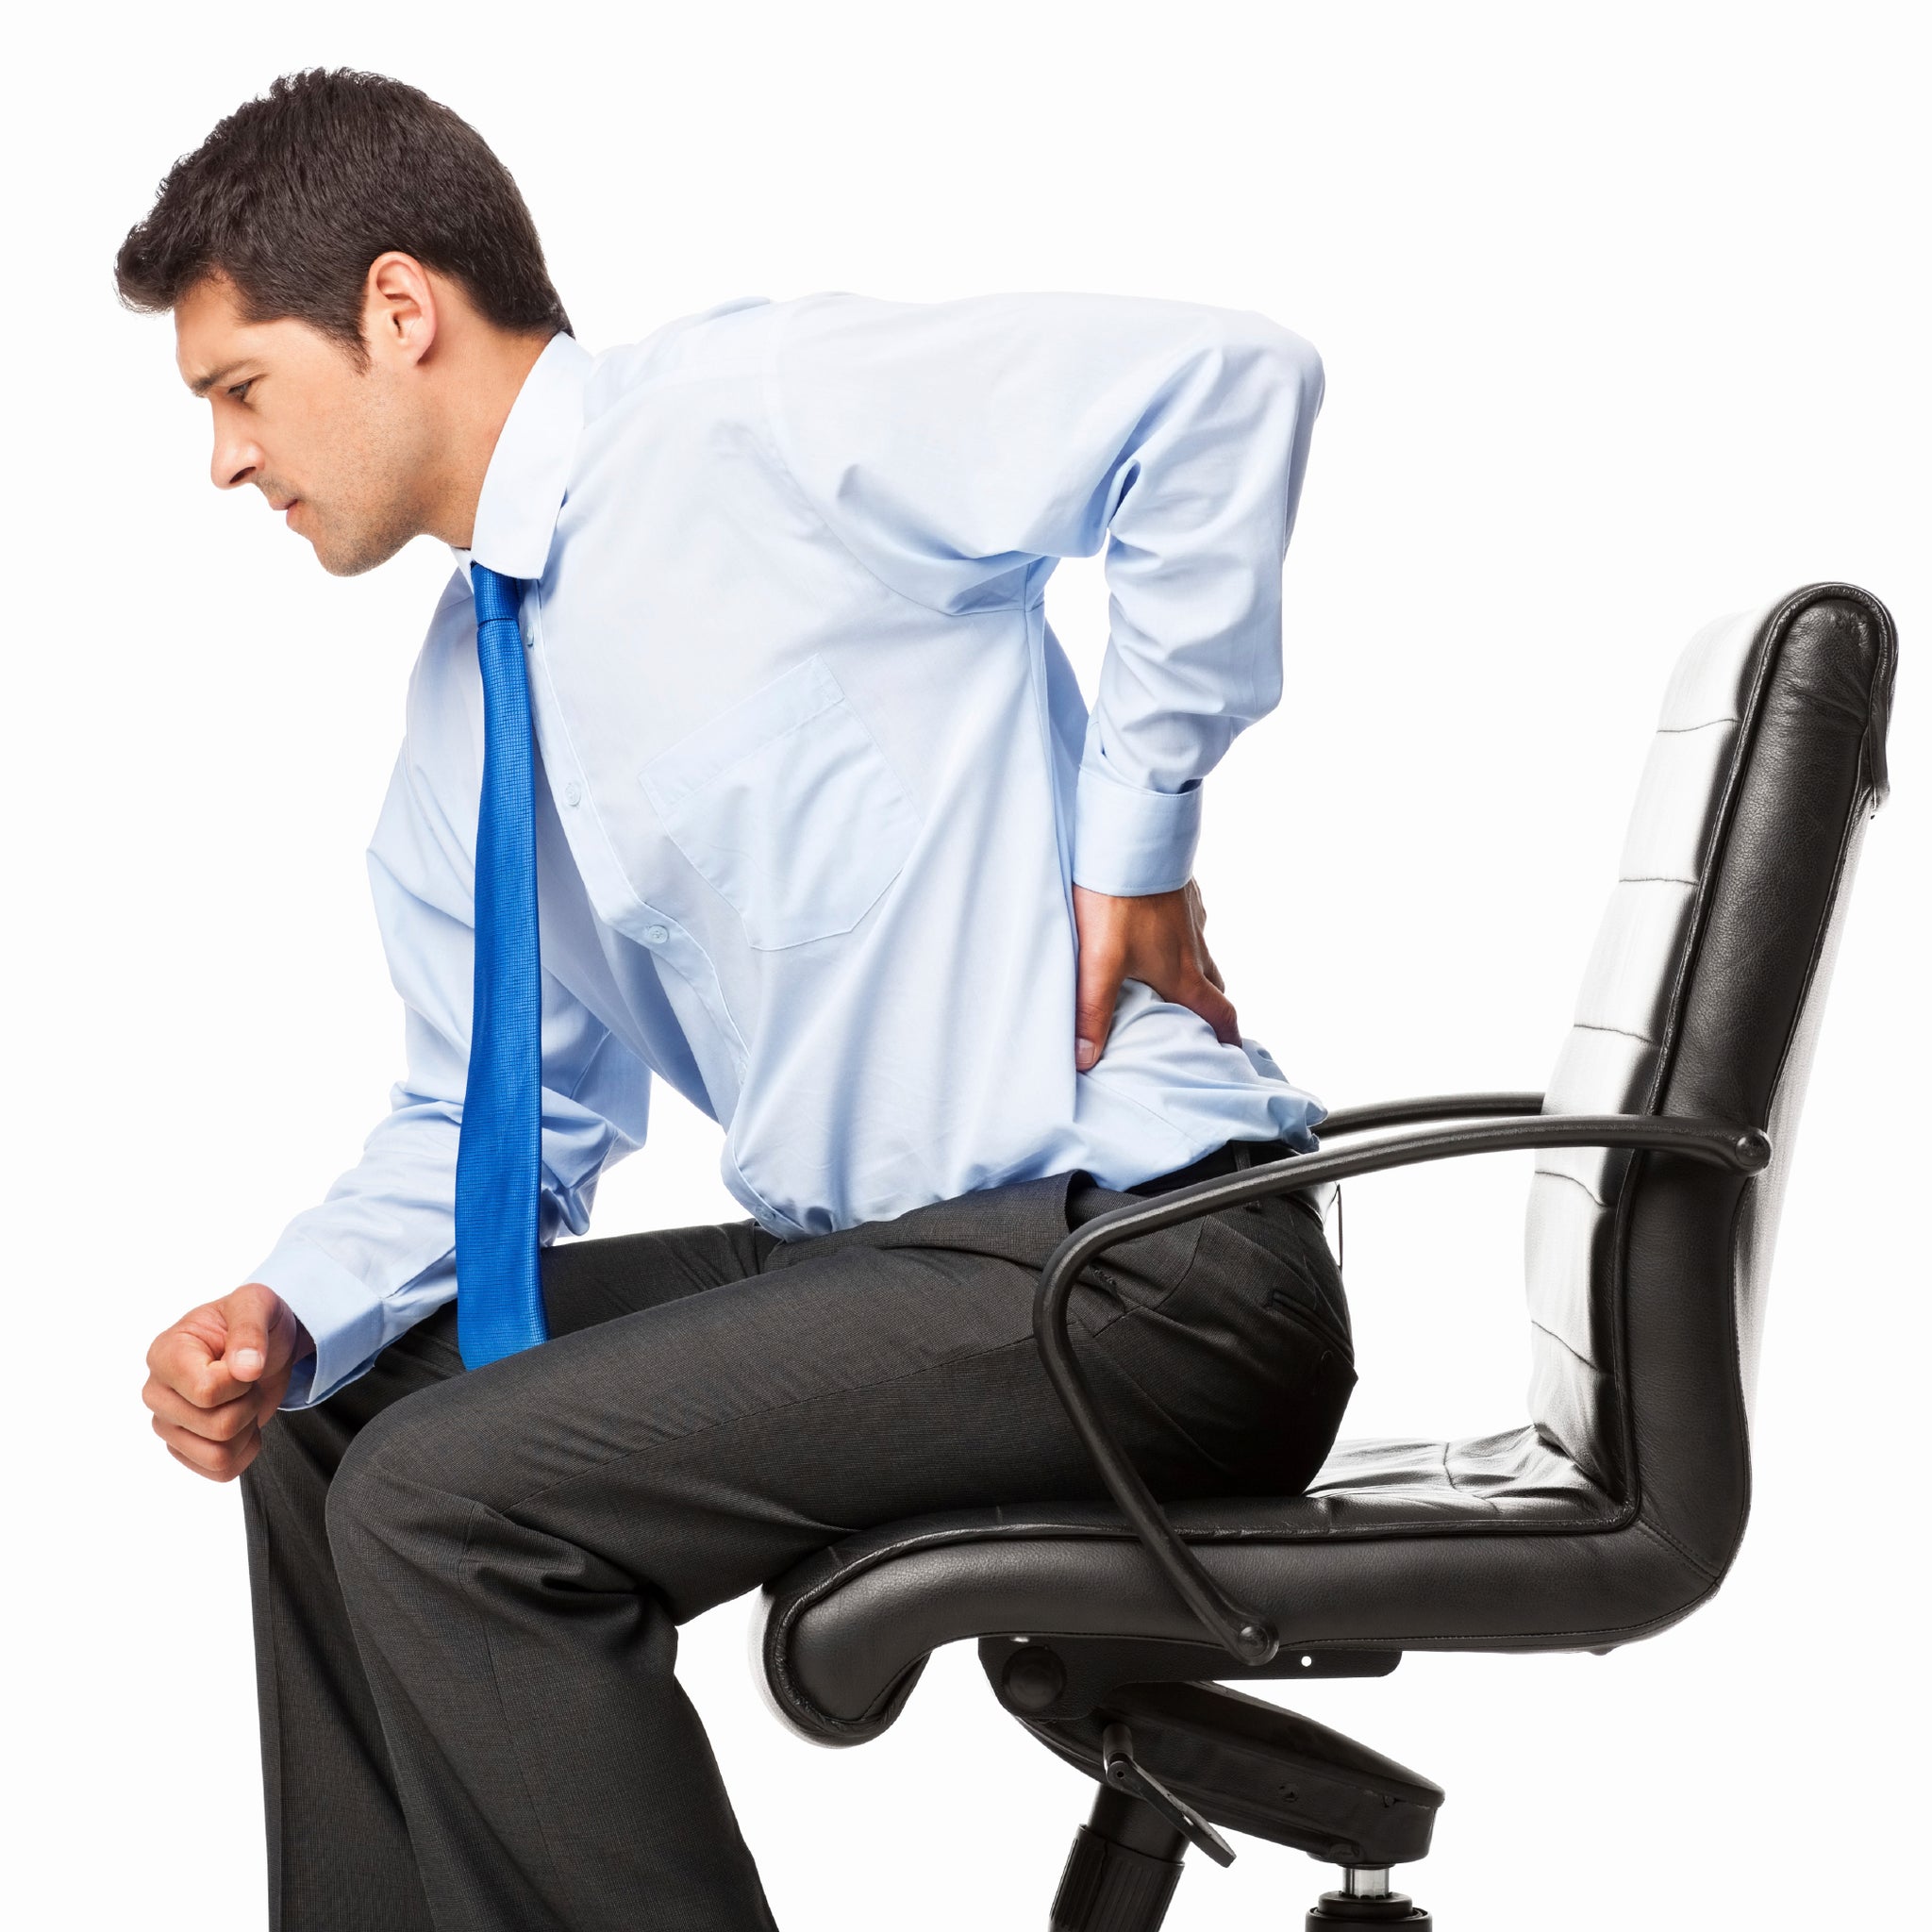 4 Medical Conditions You Get From Too Much Sitting - Desk Jockey LLC